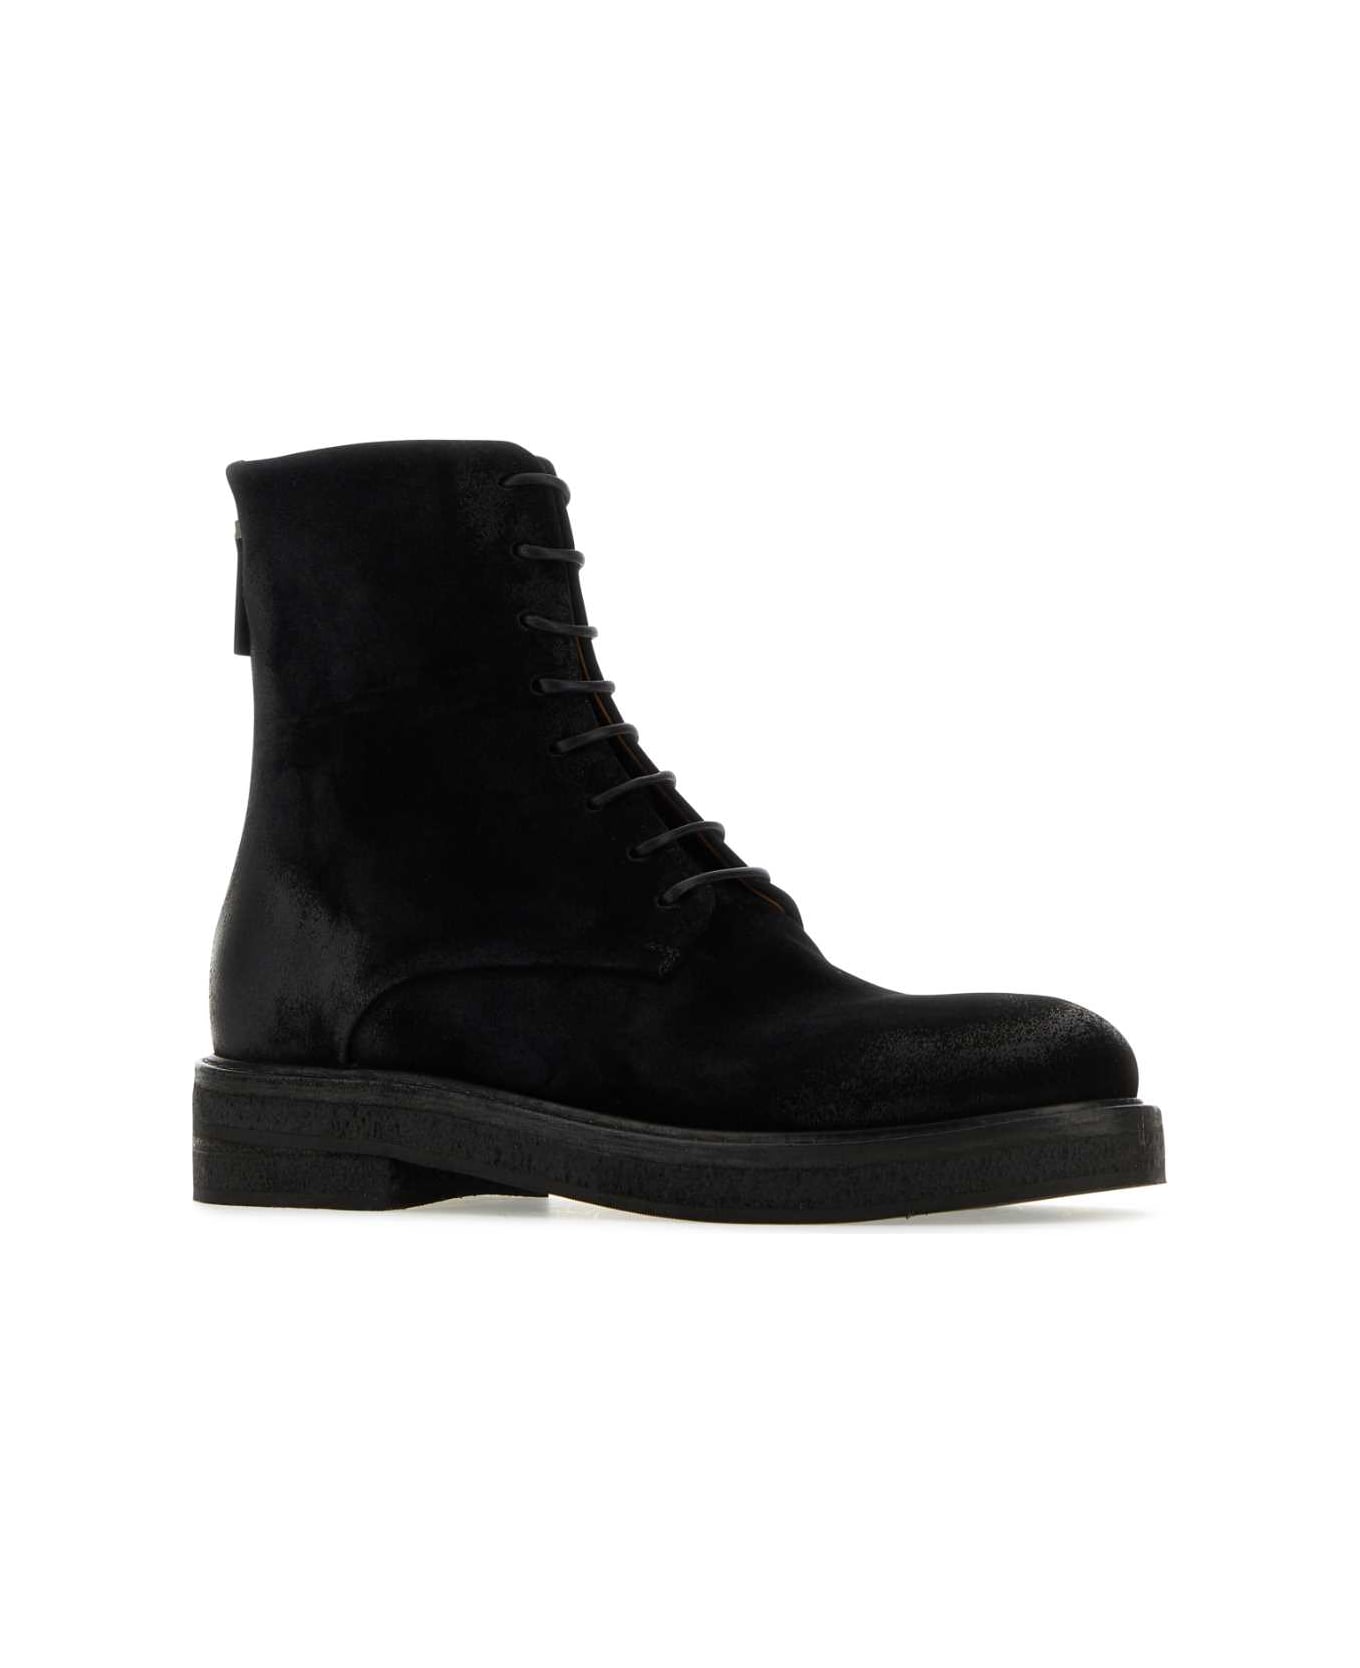 Marsell Black Suede Ankle Boots - BLACK